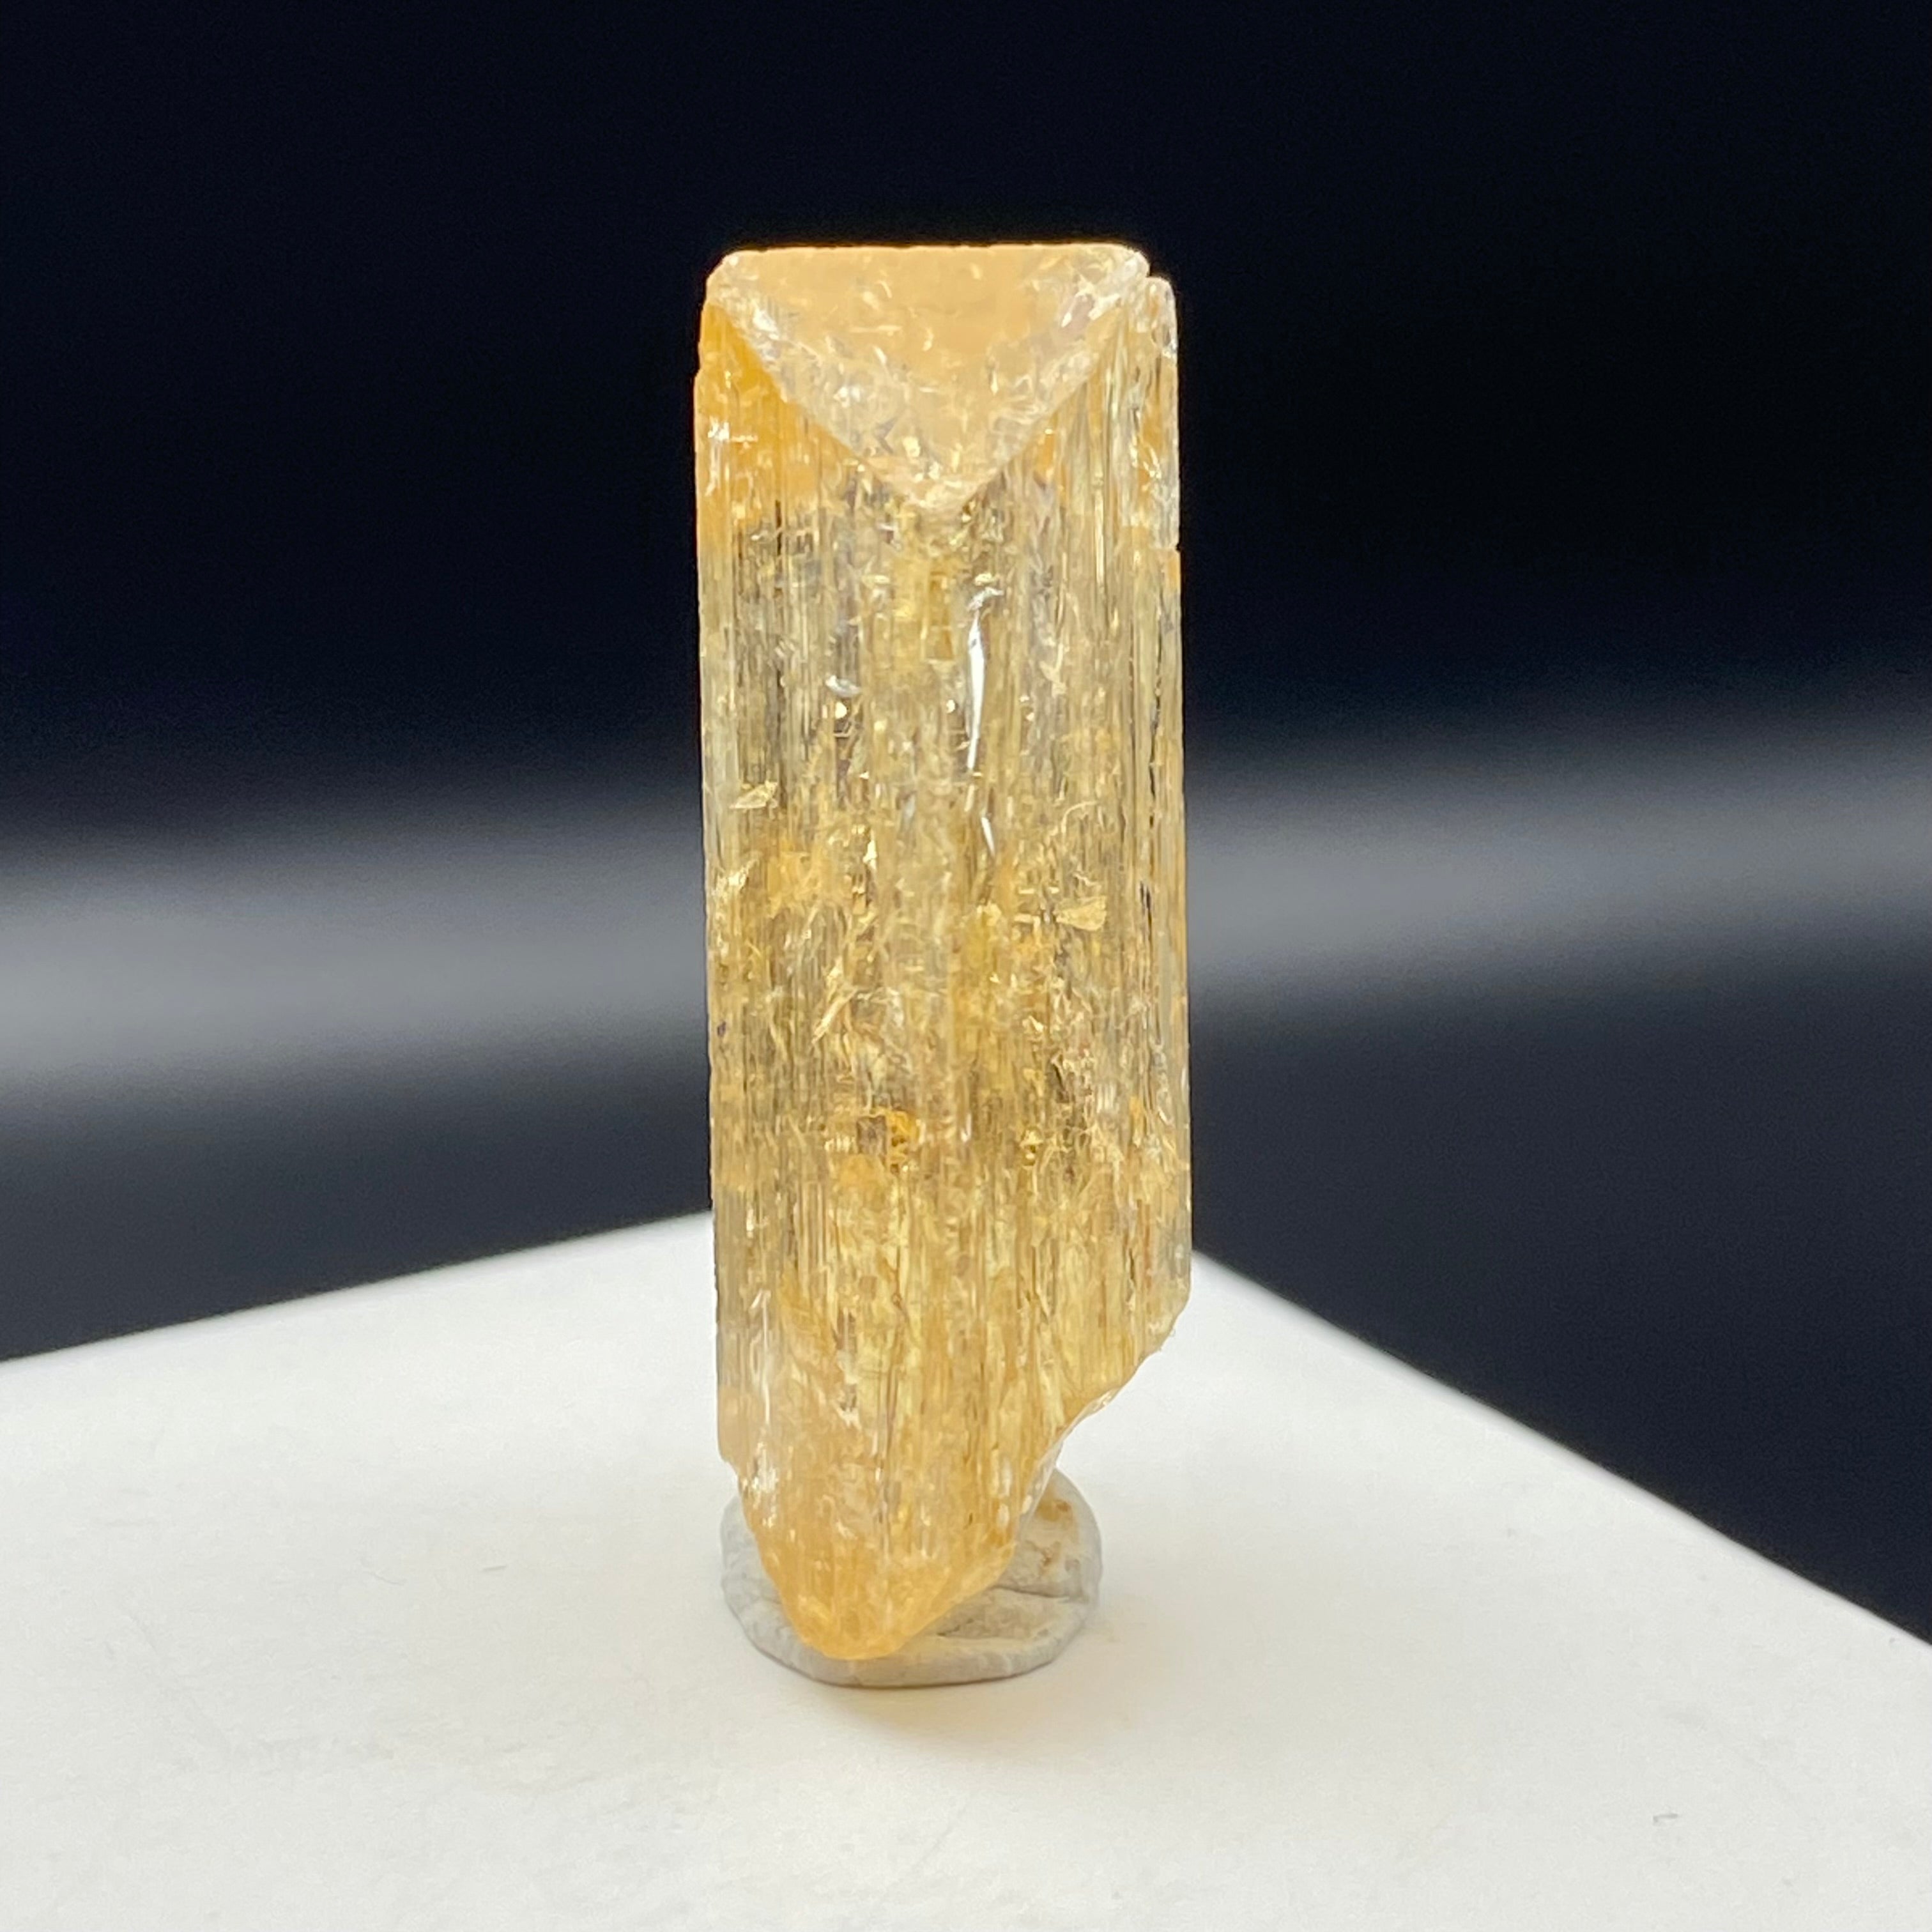 Imperial Topaz Natural Full Terminated Crystal - 128